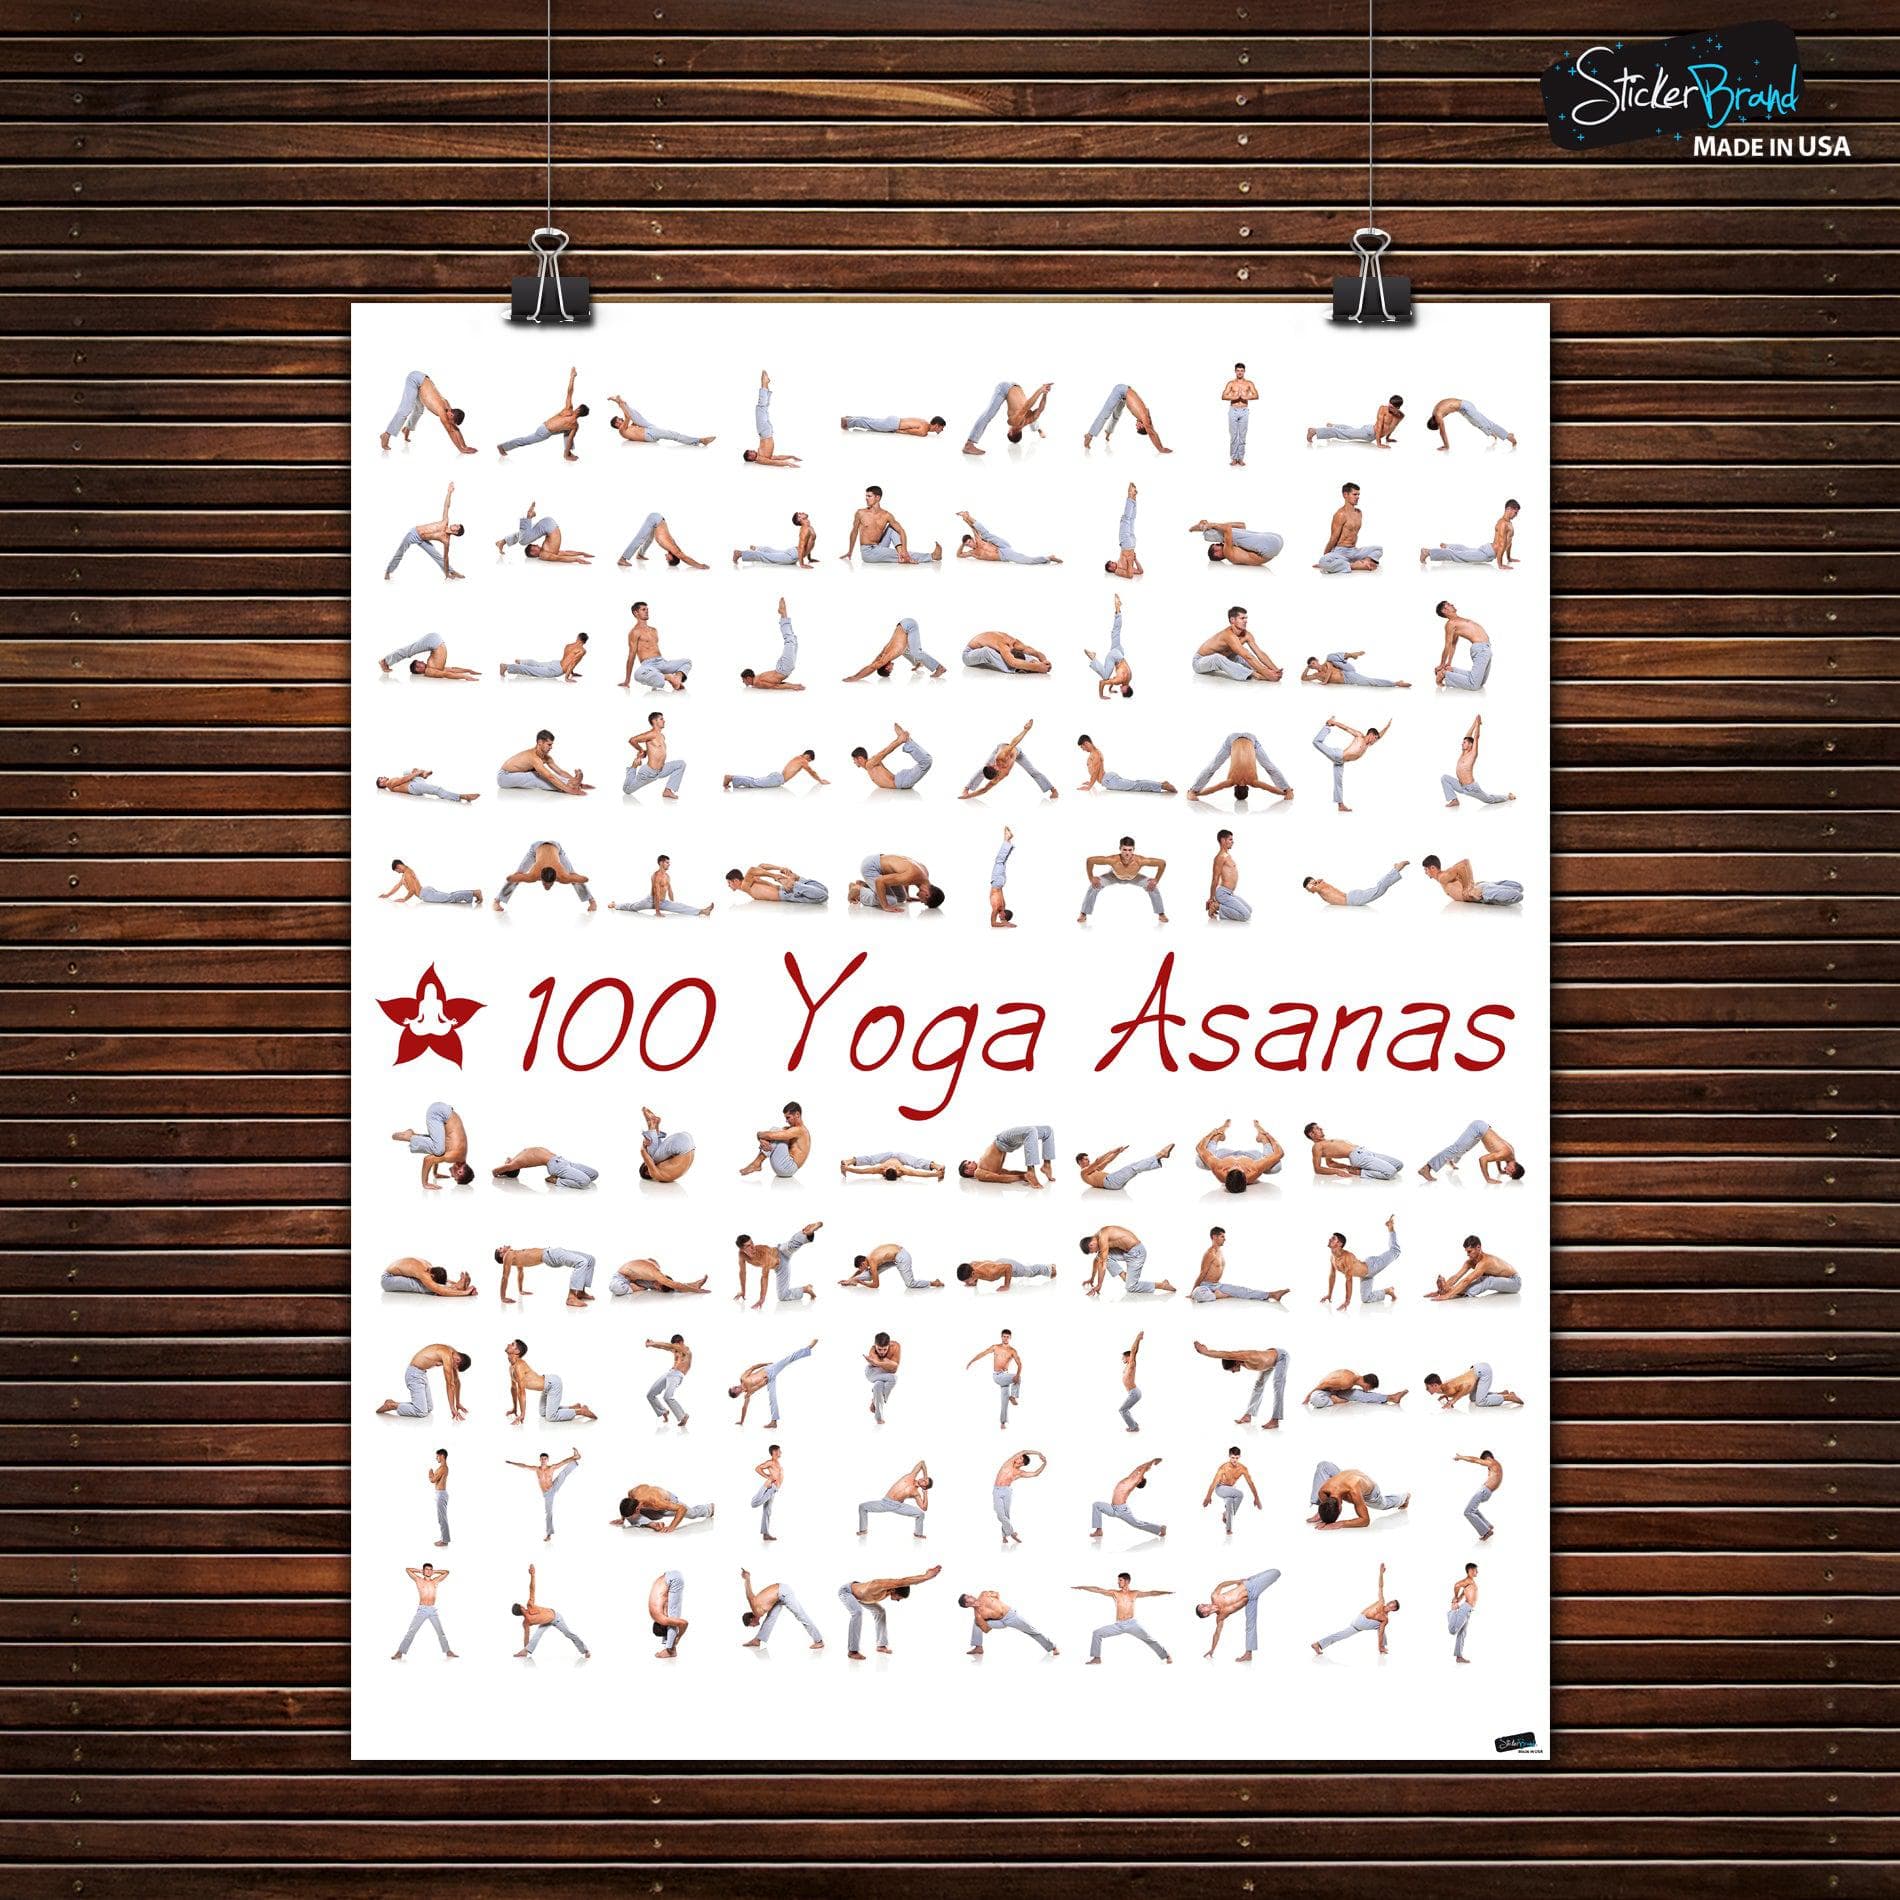 Yoga Poses Reference Chart Studio Gray Black Wood Framed Poster 14x20 -  Poster Foundry